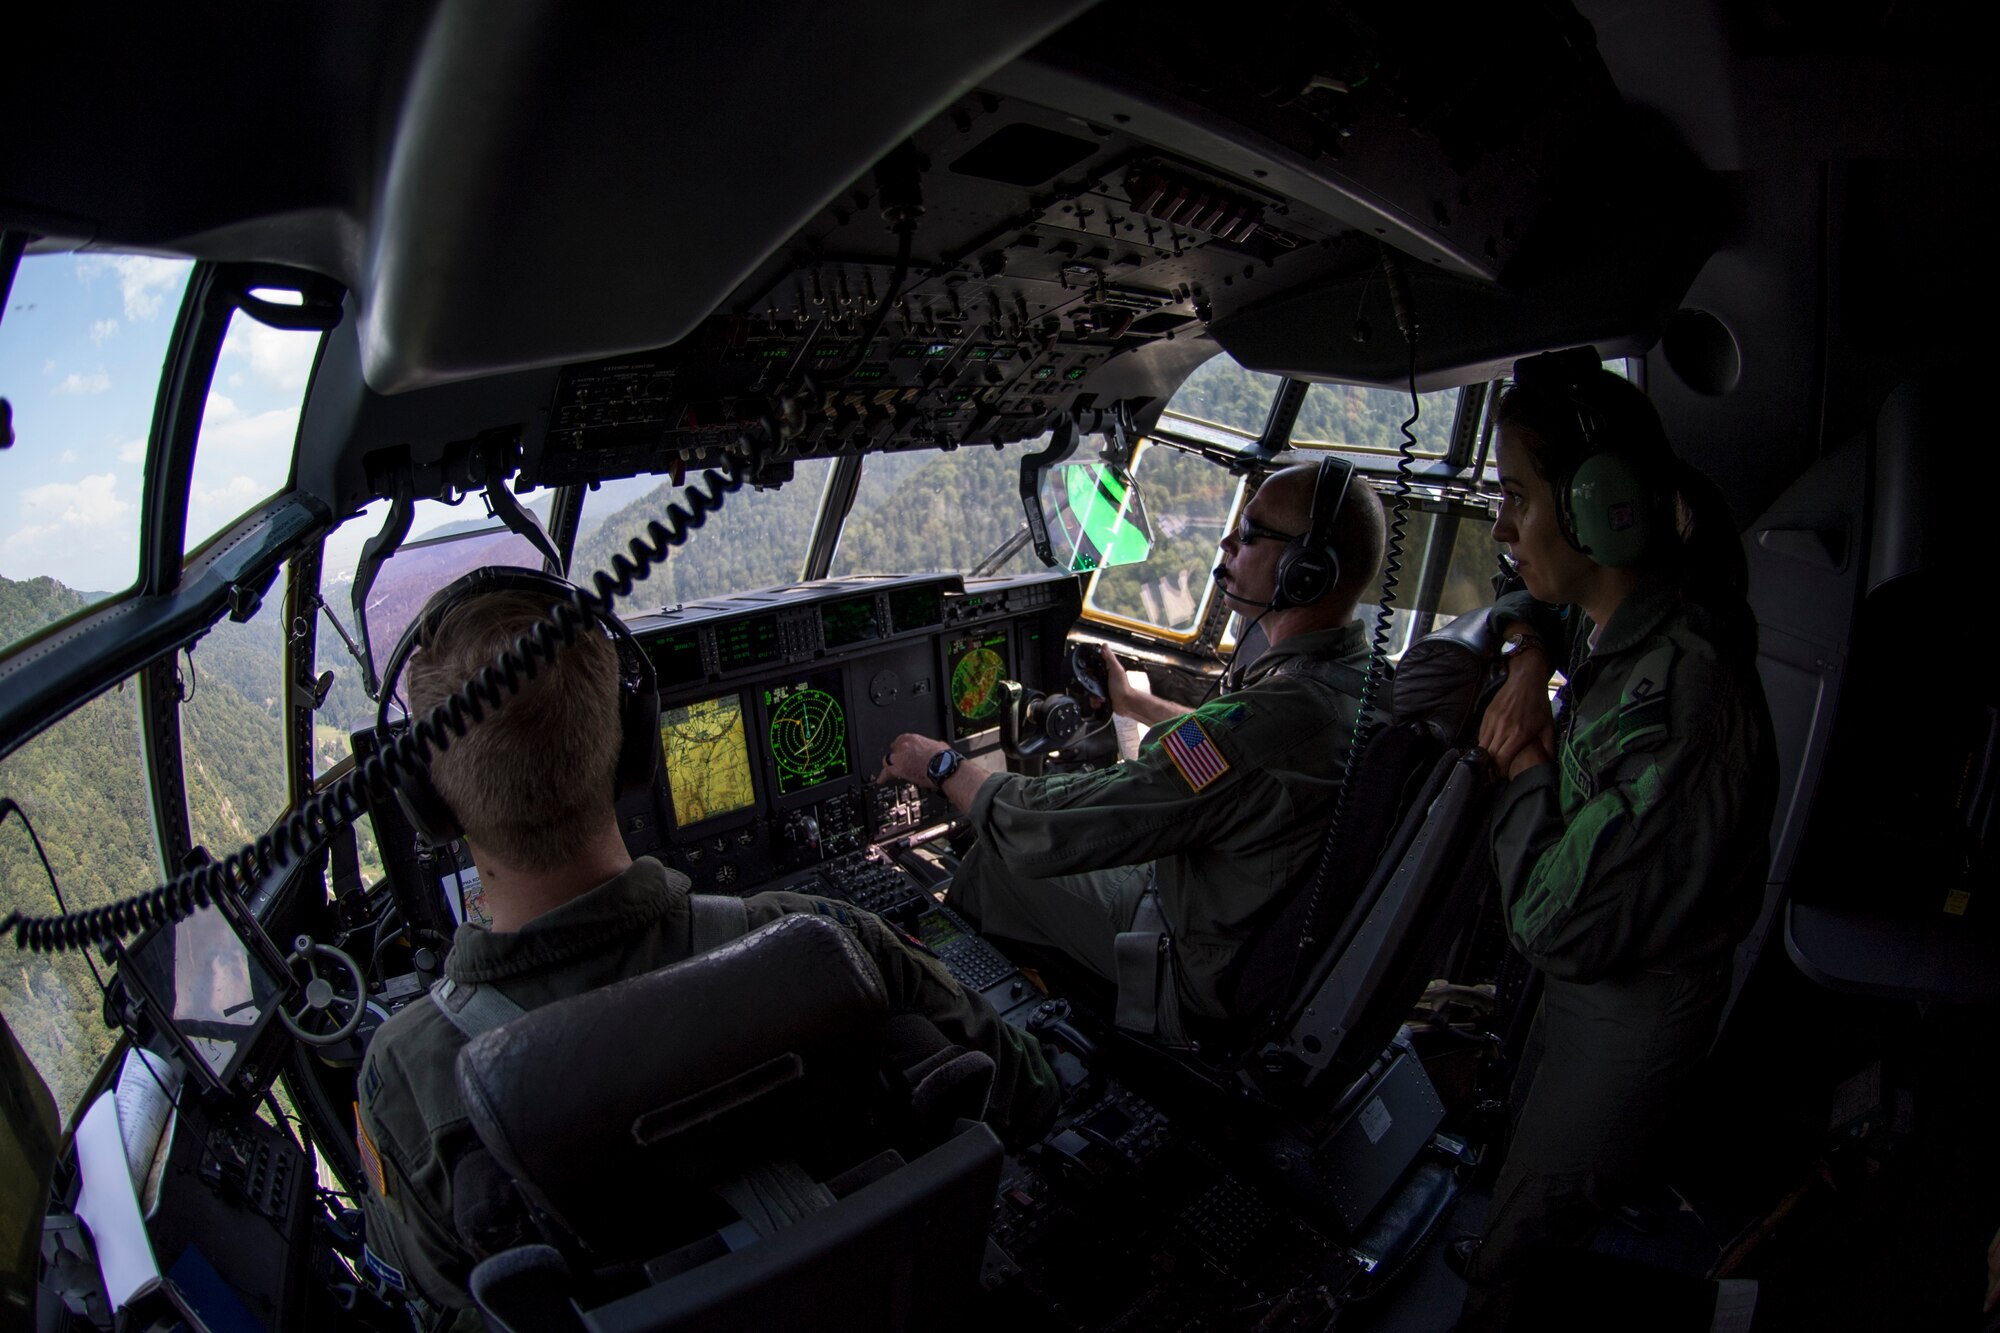 U.S. Air Force Capt. Bryant Bailey, 37th Airlift Squadron pilot, and Lt. Col. Alex Miller, 37th AS director of operations, fly a C-130J Super Hercules aircraft over Romania as Romanian air force Lt. Cmdr. Nicoleta Udrescu, Air Base 90 Otopeni pilot, watches during exercise Carpathian Summer 2018, Aug. 21, 2018. The purpose of the bilateral training exercise is to enhance interoperability and readiness by conducting combined air operations with the Romanian air force. (U.S. Air Force photo by Senior Airman Devin Boyer)